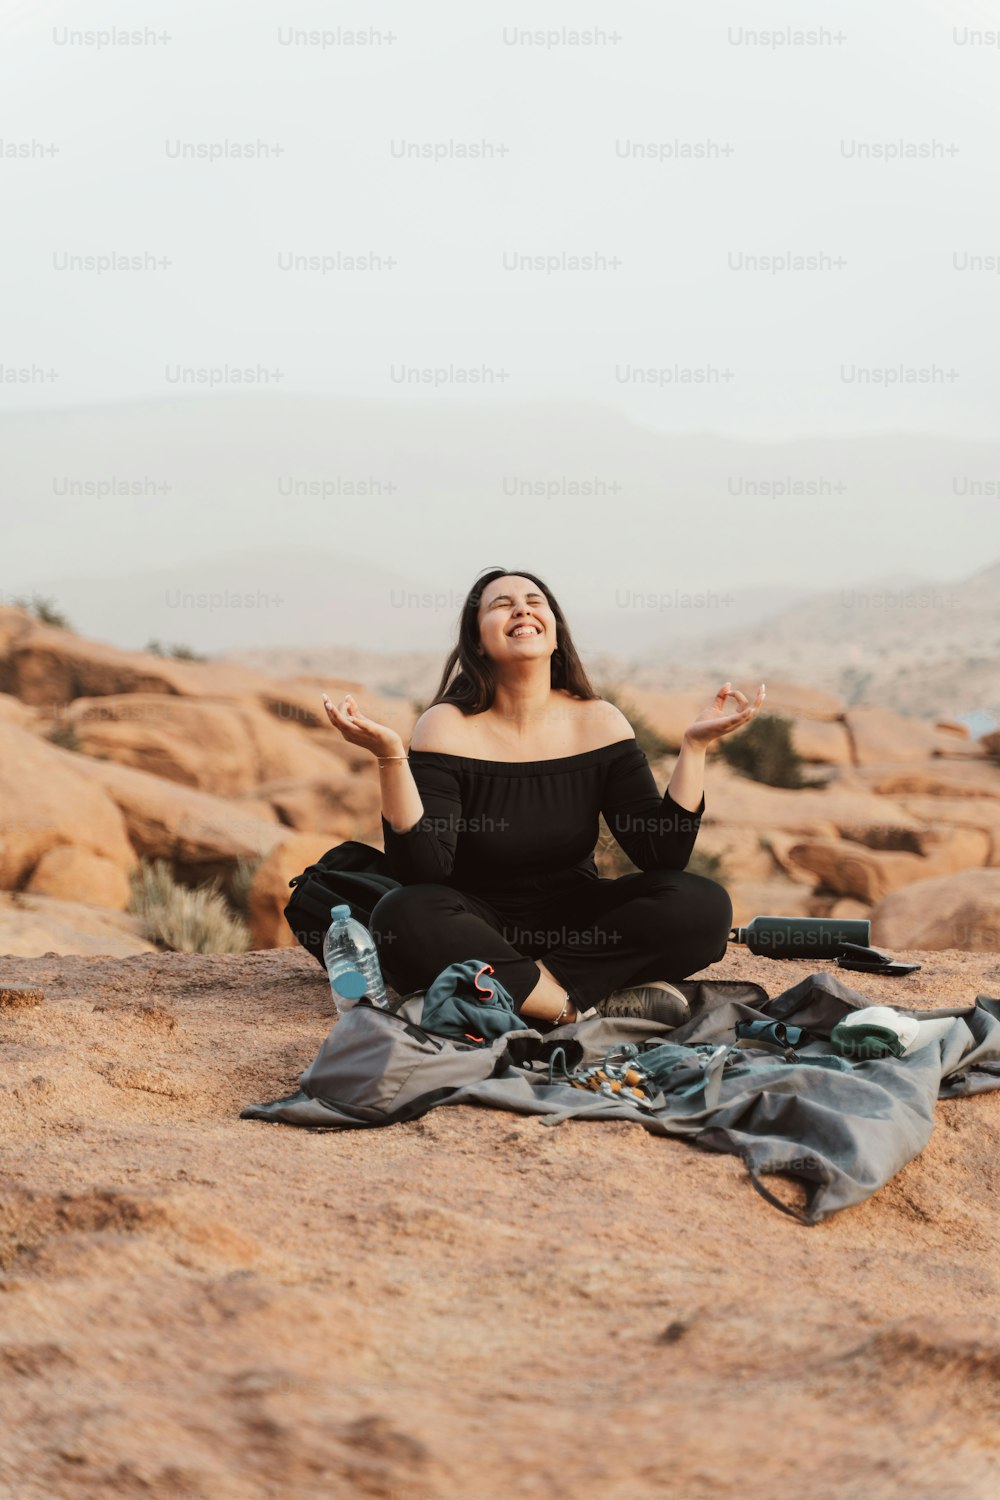 a woman in a black top is sitting on a blanket in the desert